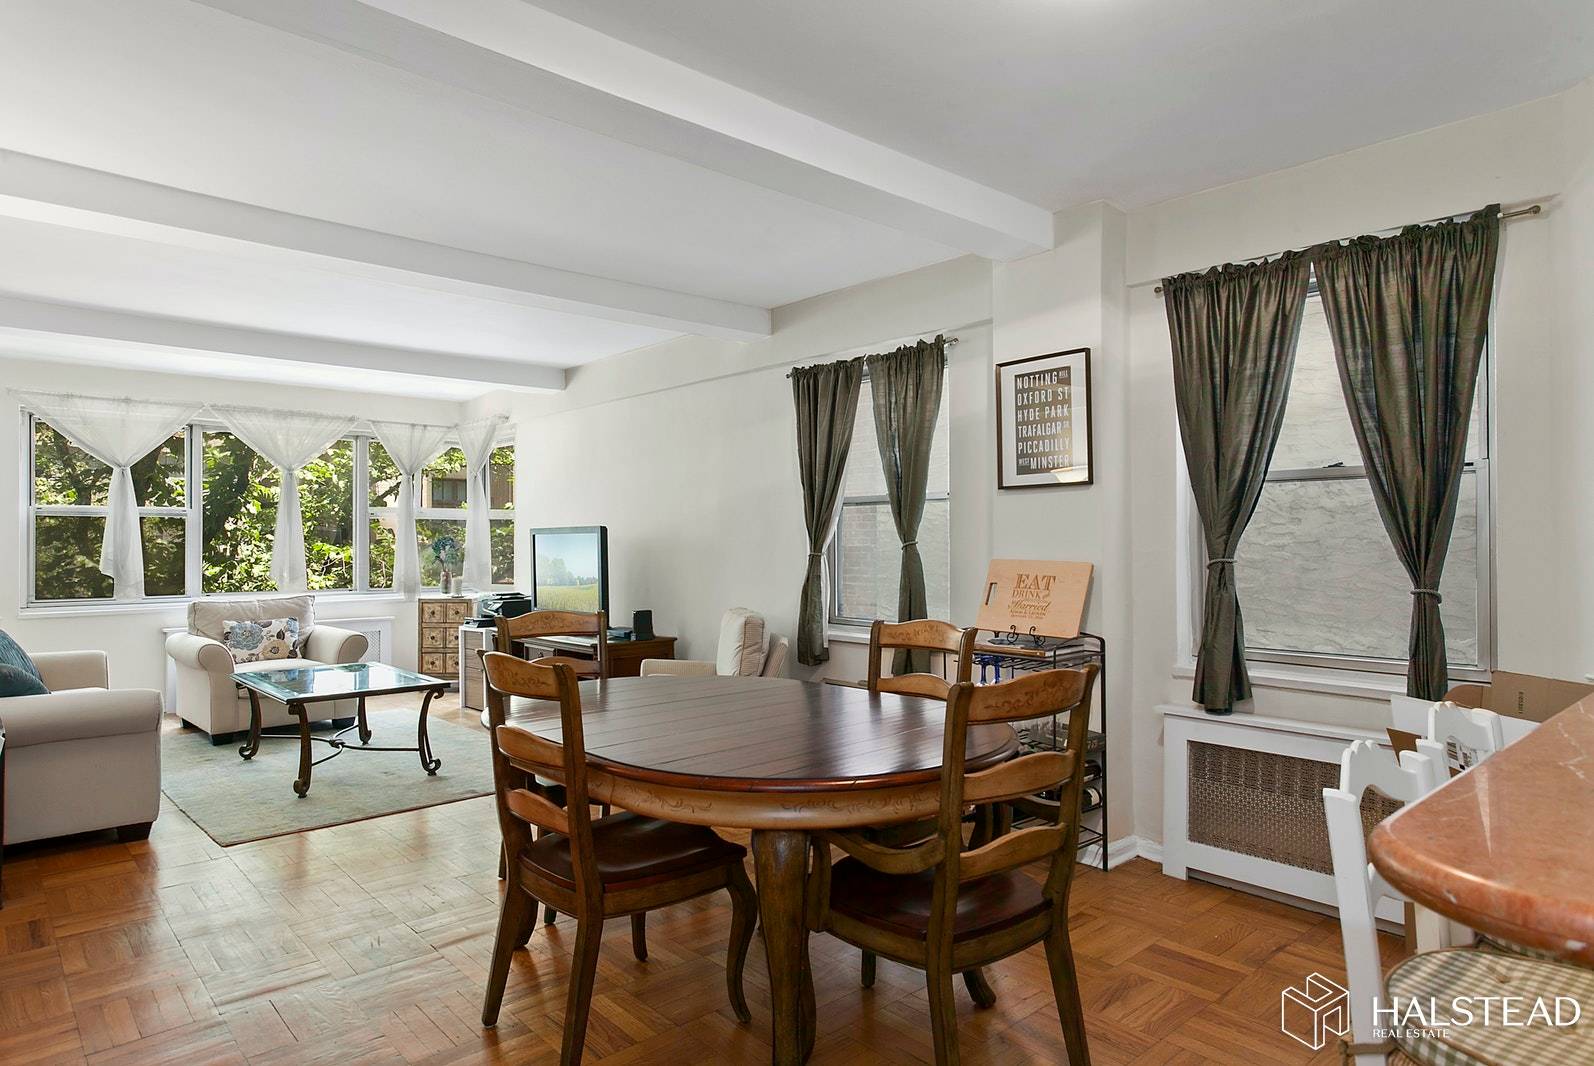 Built in 1948 The Park Gramercy is offering a large corner one bed one bath with three exposures and a 28ft living room.